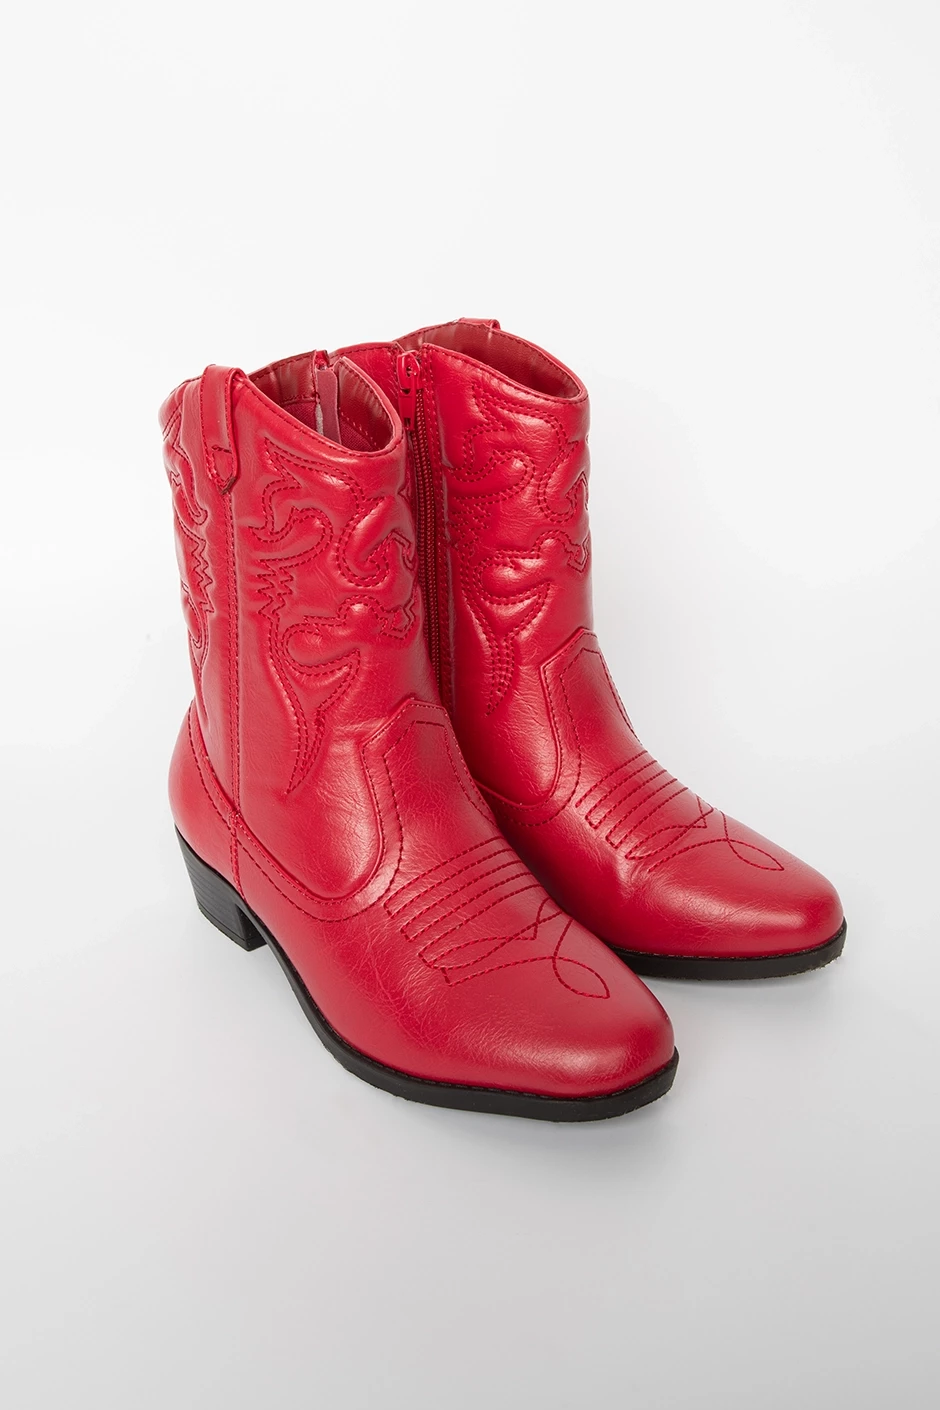 https://c211747605cdf5d8cd74-f50fbe37b046904c7c00bee626e99452.ssl.cf2.rackcdn.com/images/products/kids_country_charm_boots_red_4_1682535784_lg.webp